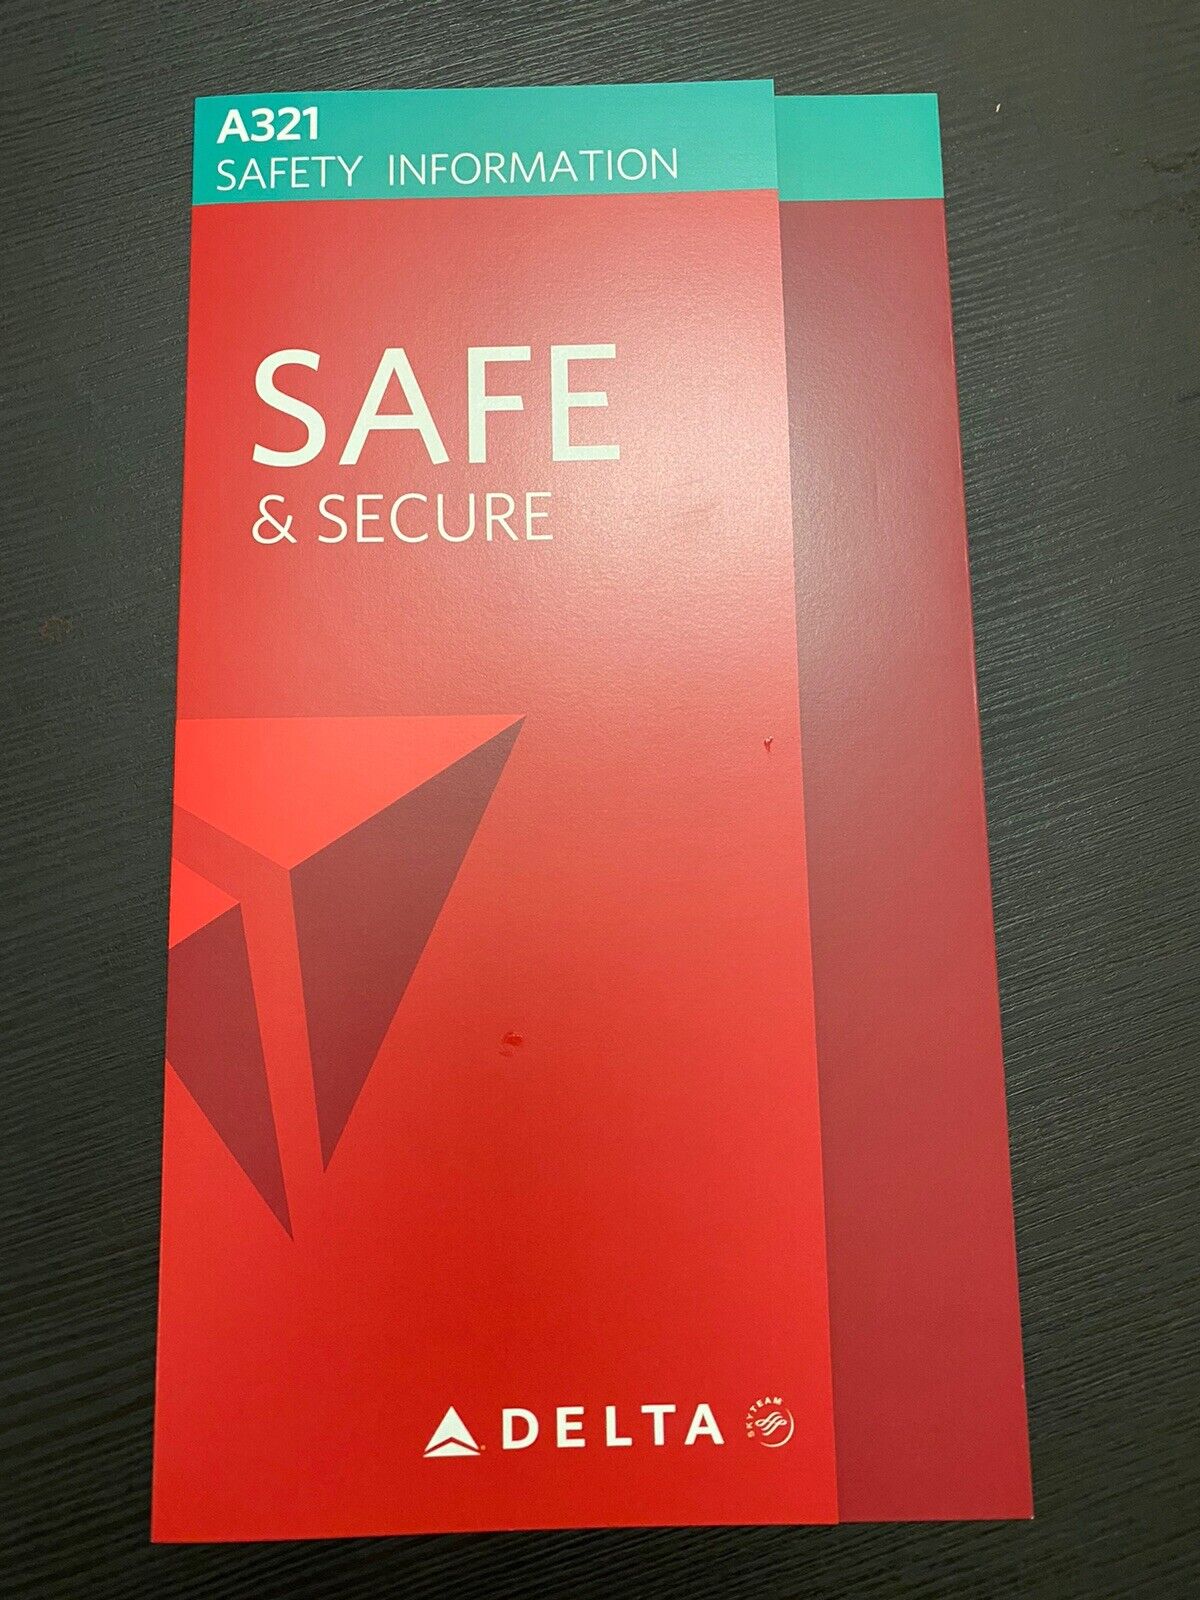 Delta Airlines Airbus 321 Airline Safety Card